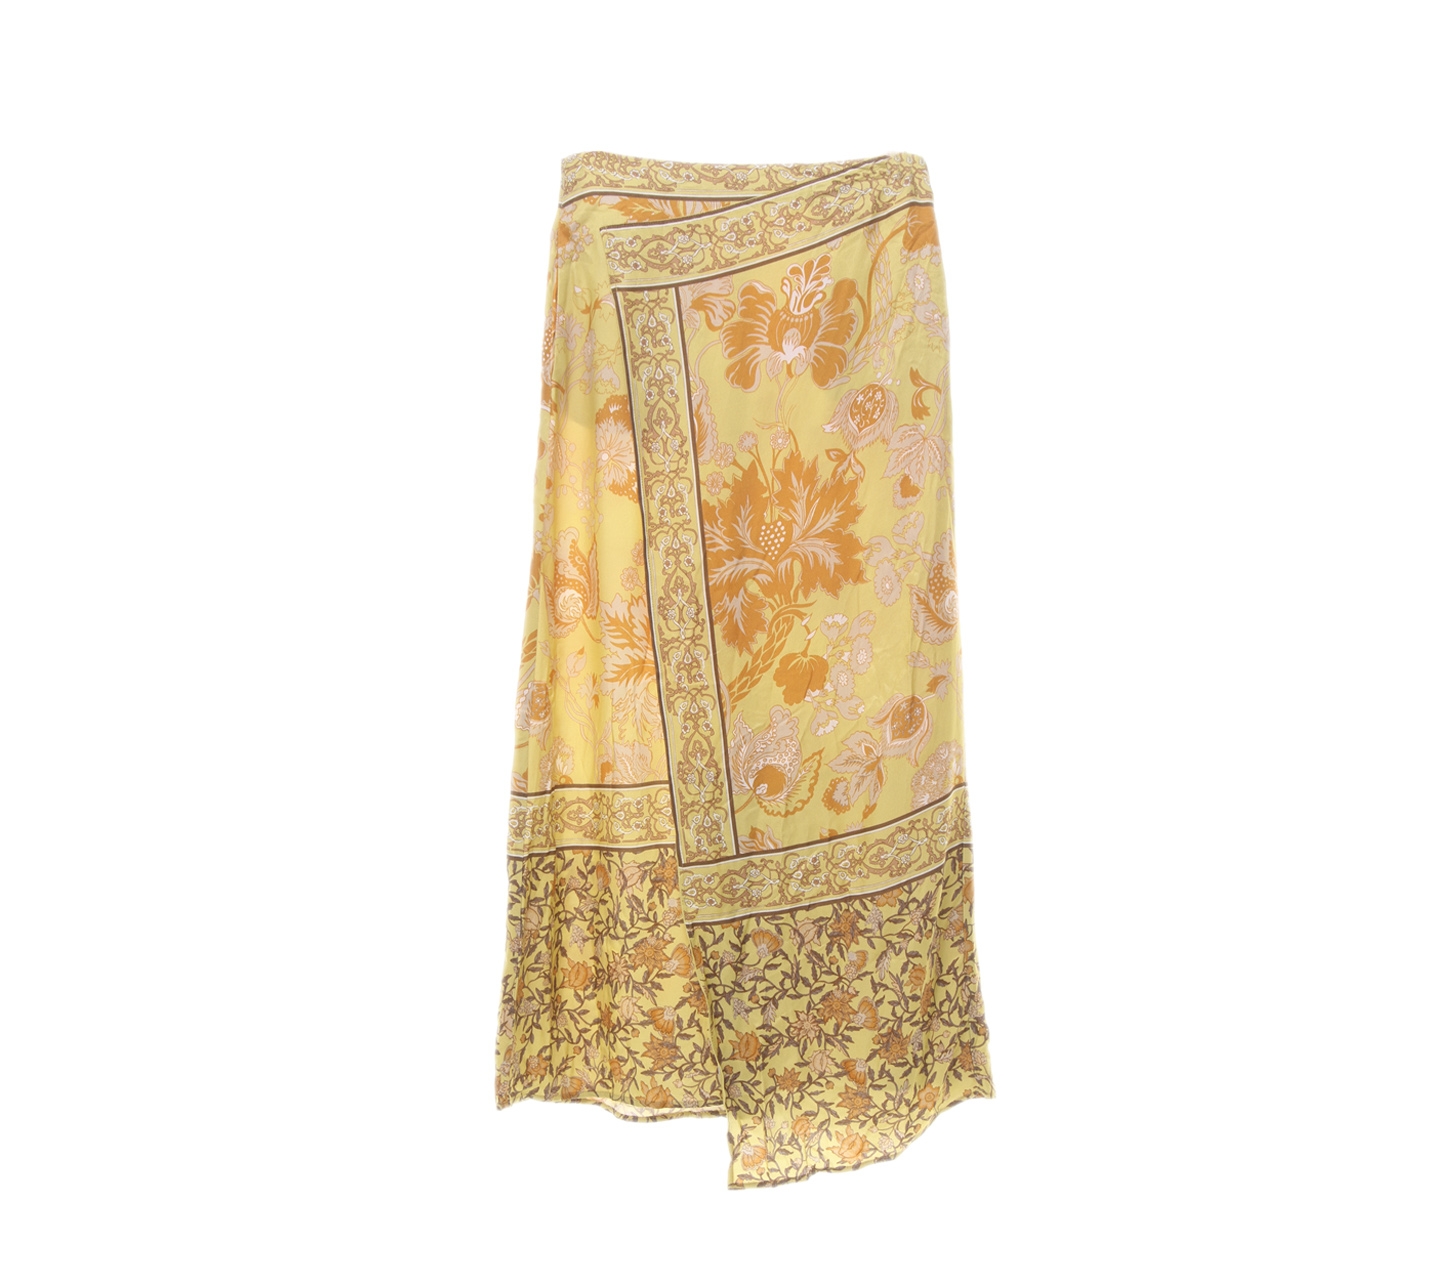 H&M Yellow Floral Maxi Skirt